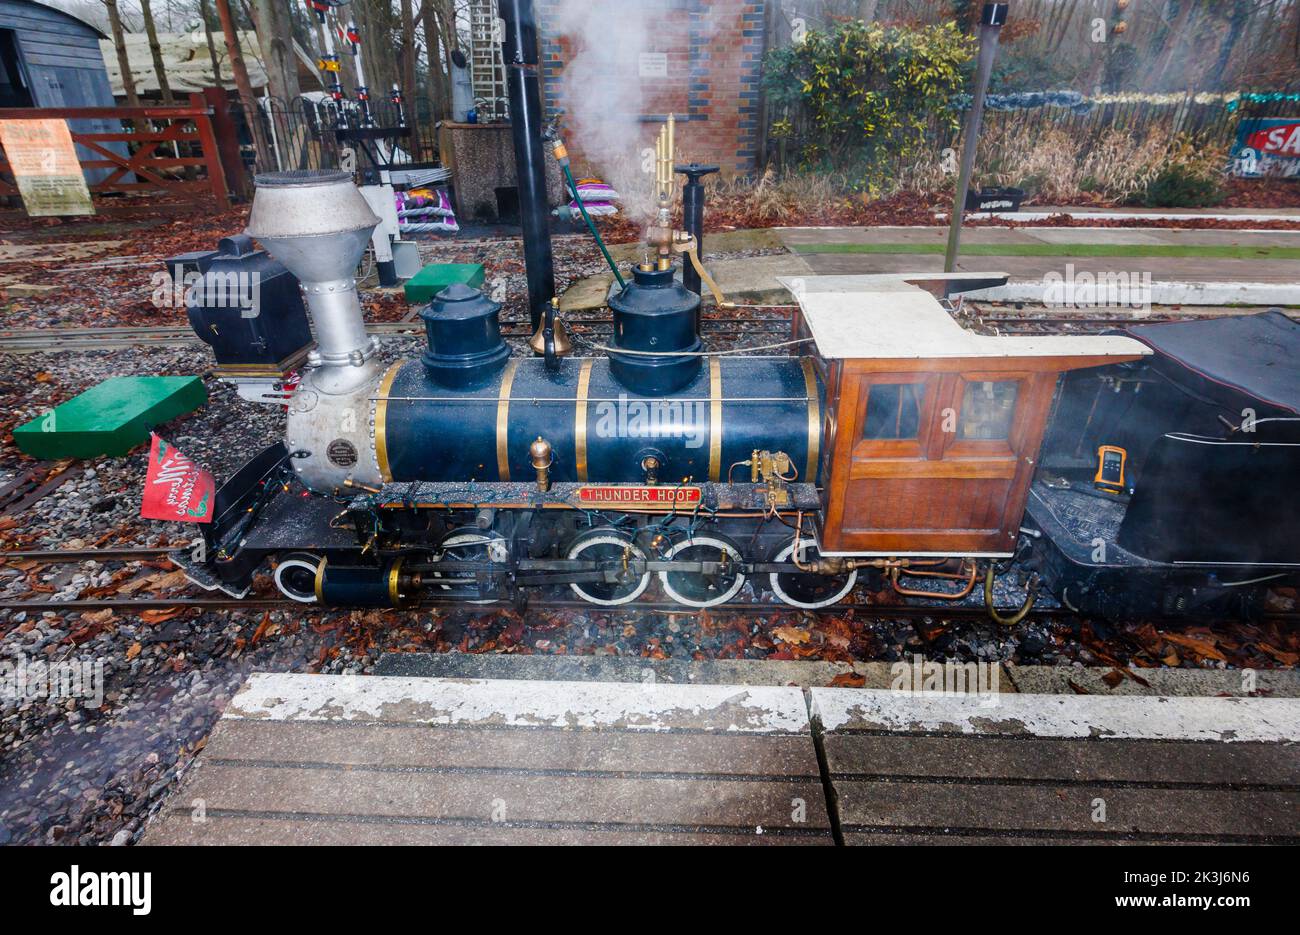 Mizens Railway, a 7¼ inch gauge miniature railway in Barrs Lane, Knaphill, Woking during its annual Christmas event: steam locomotive 'Thunder Hoof' Stock Photo